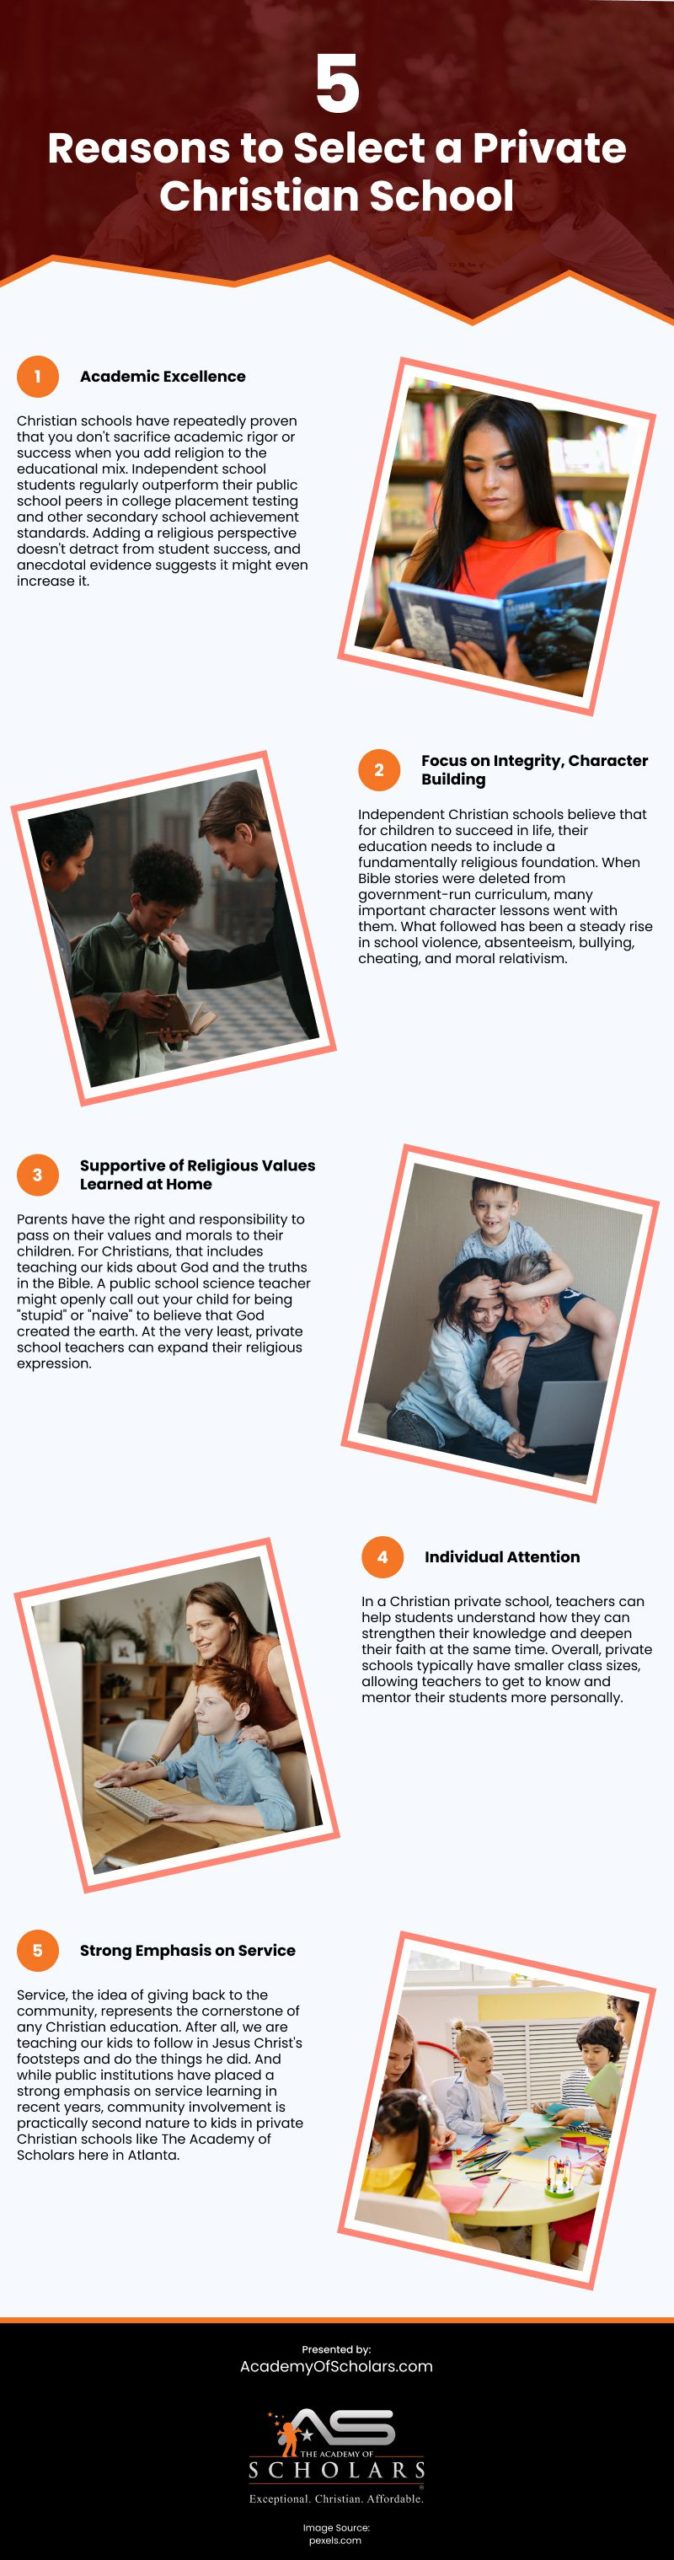 5 Reasons to Select a Private Christian School Infographic